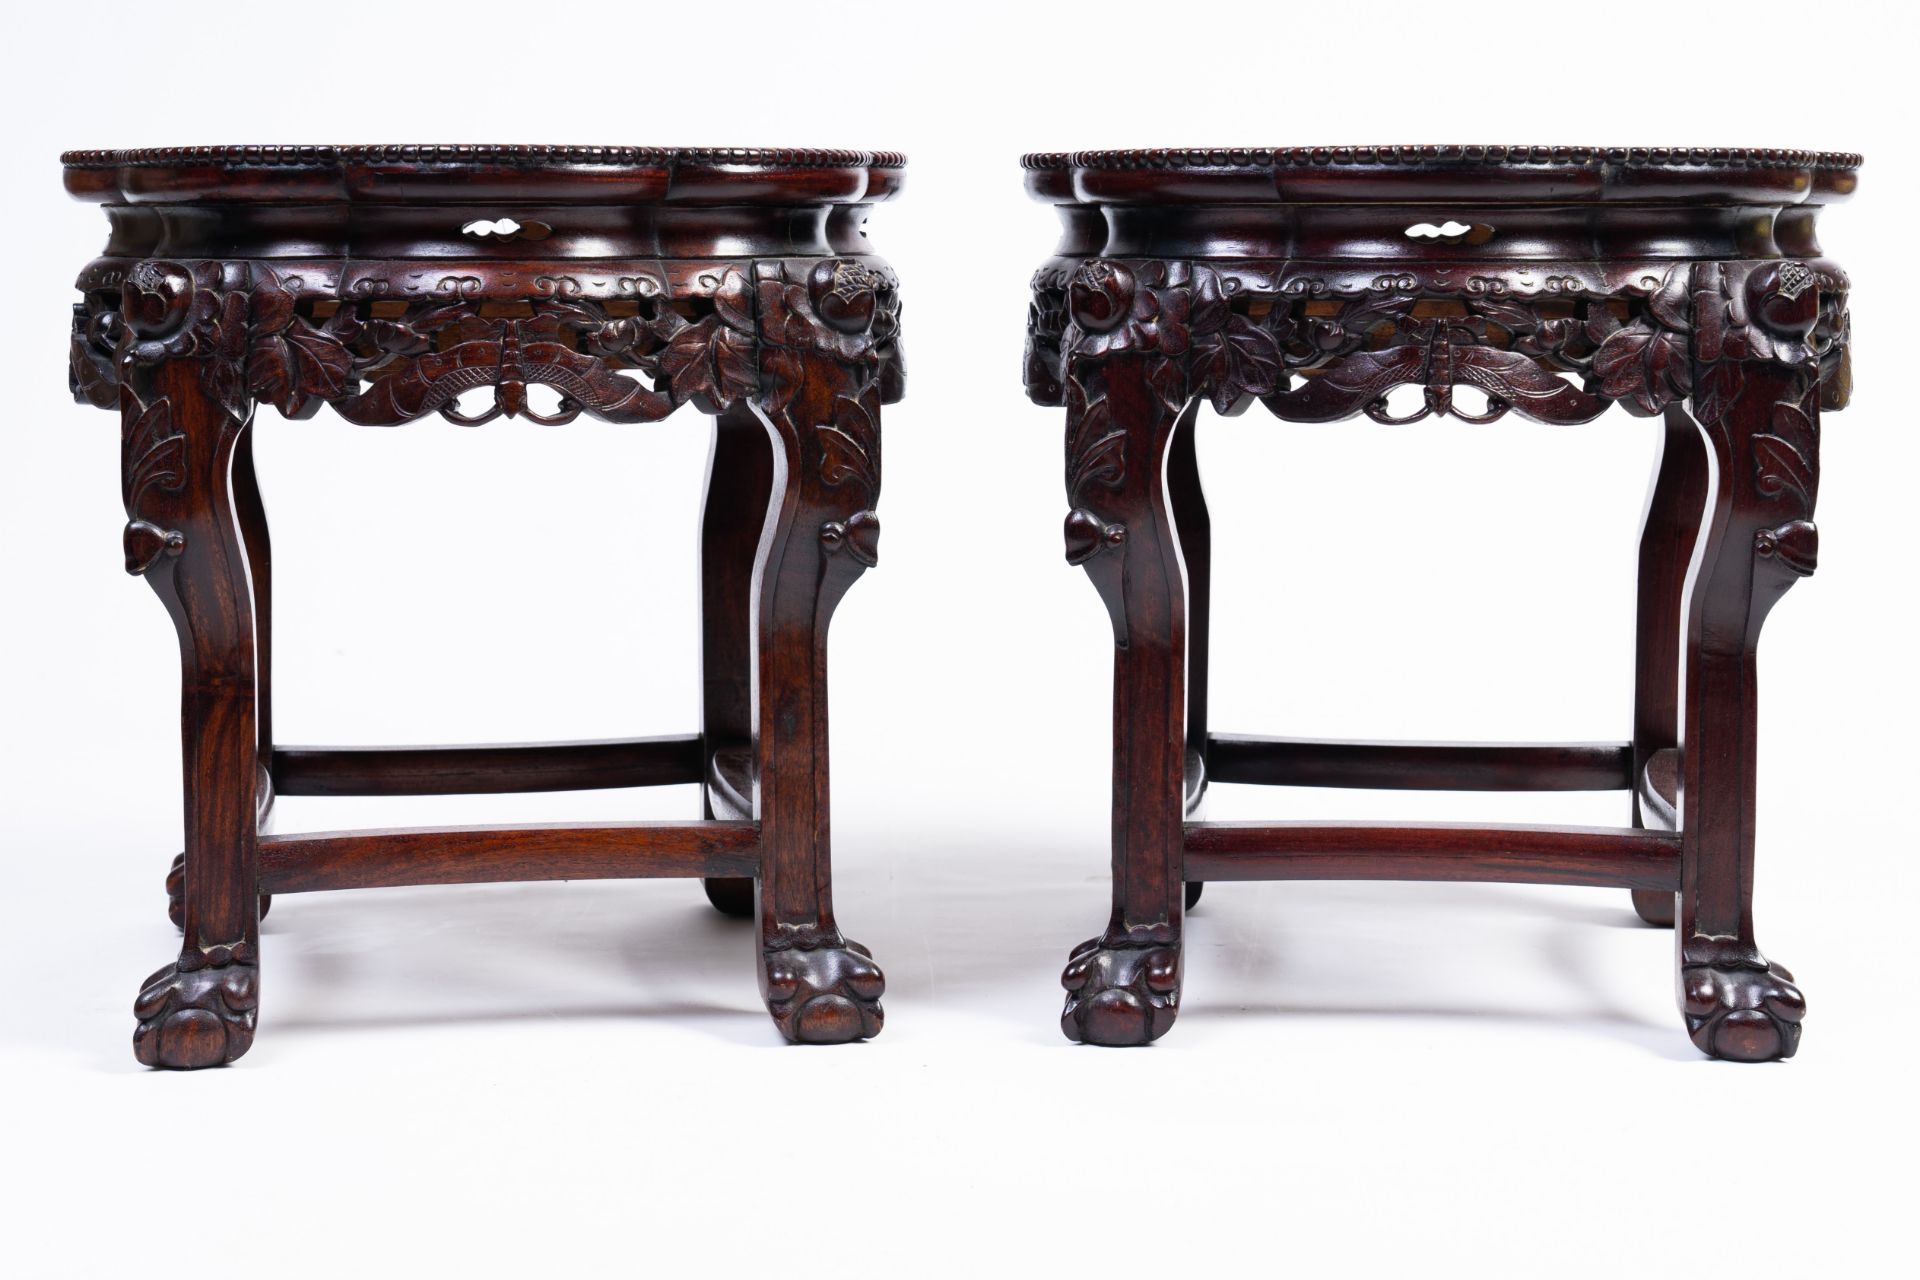 A pair of Chinese reticulated hardwood stands with marble tops, 20th C.